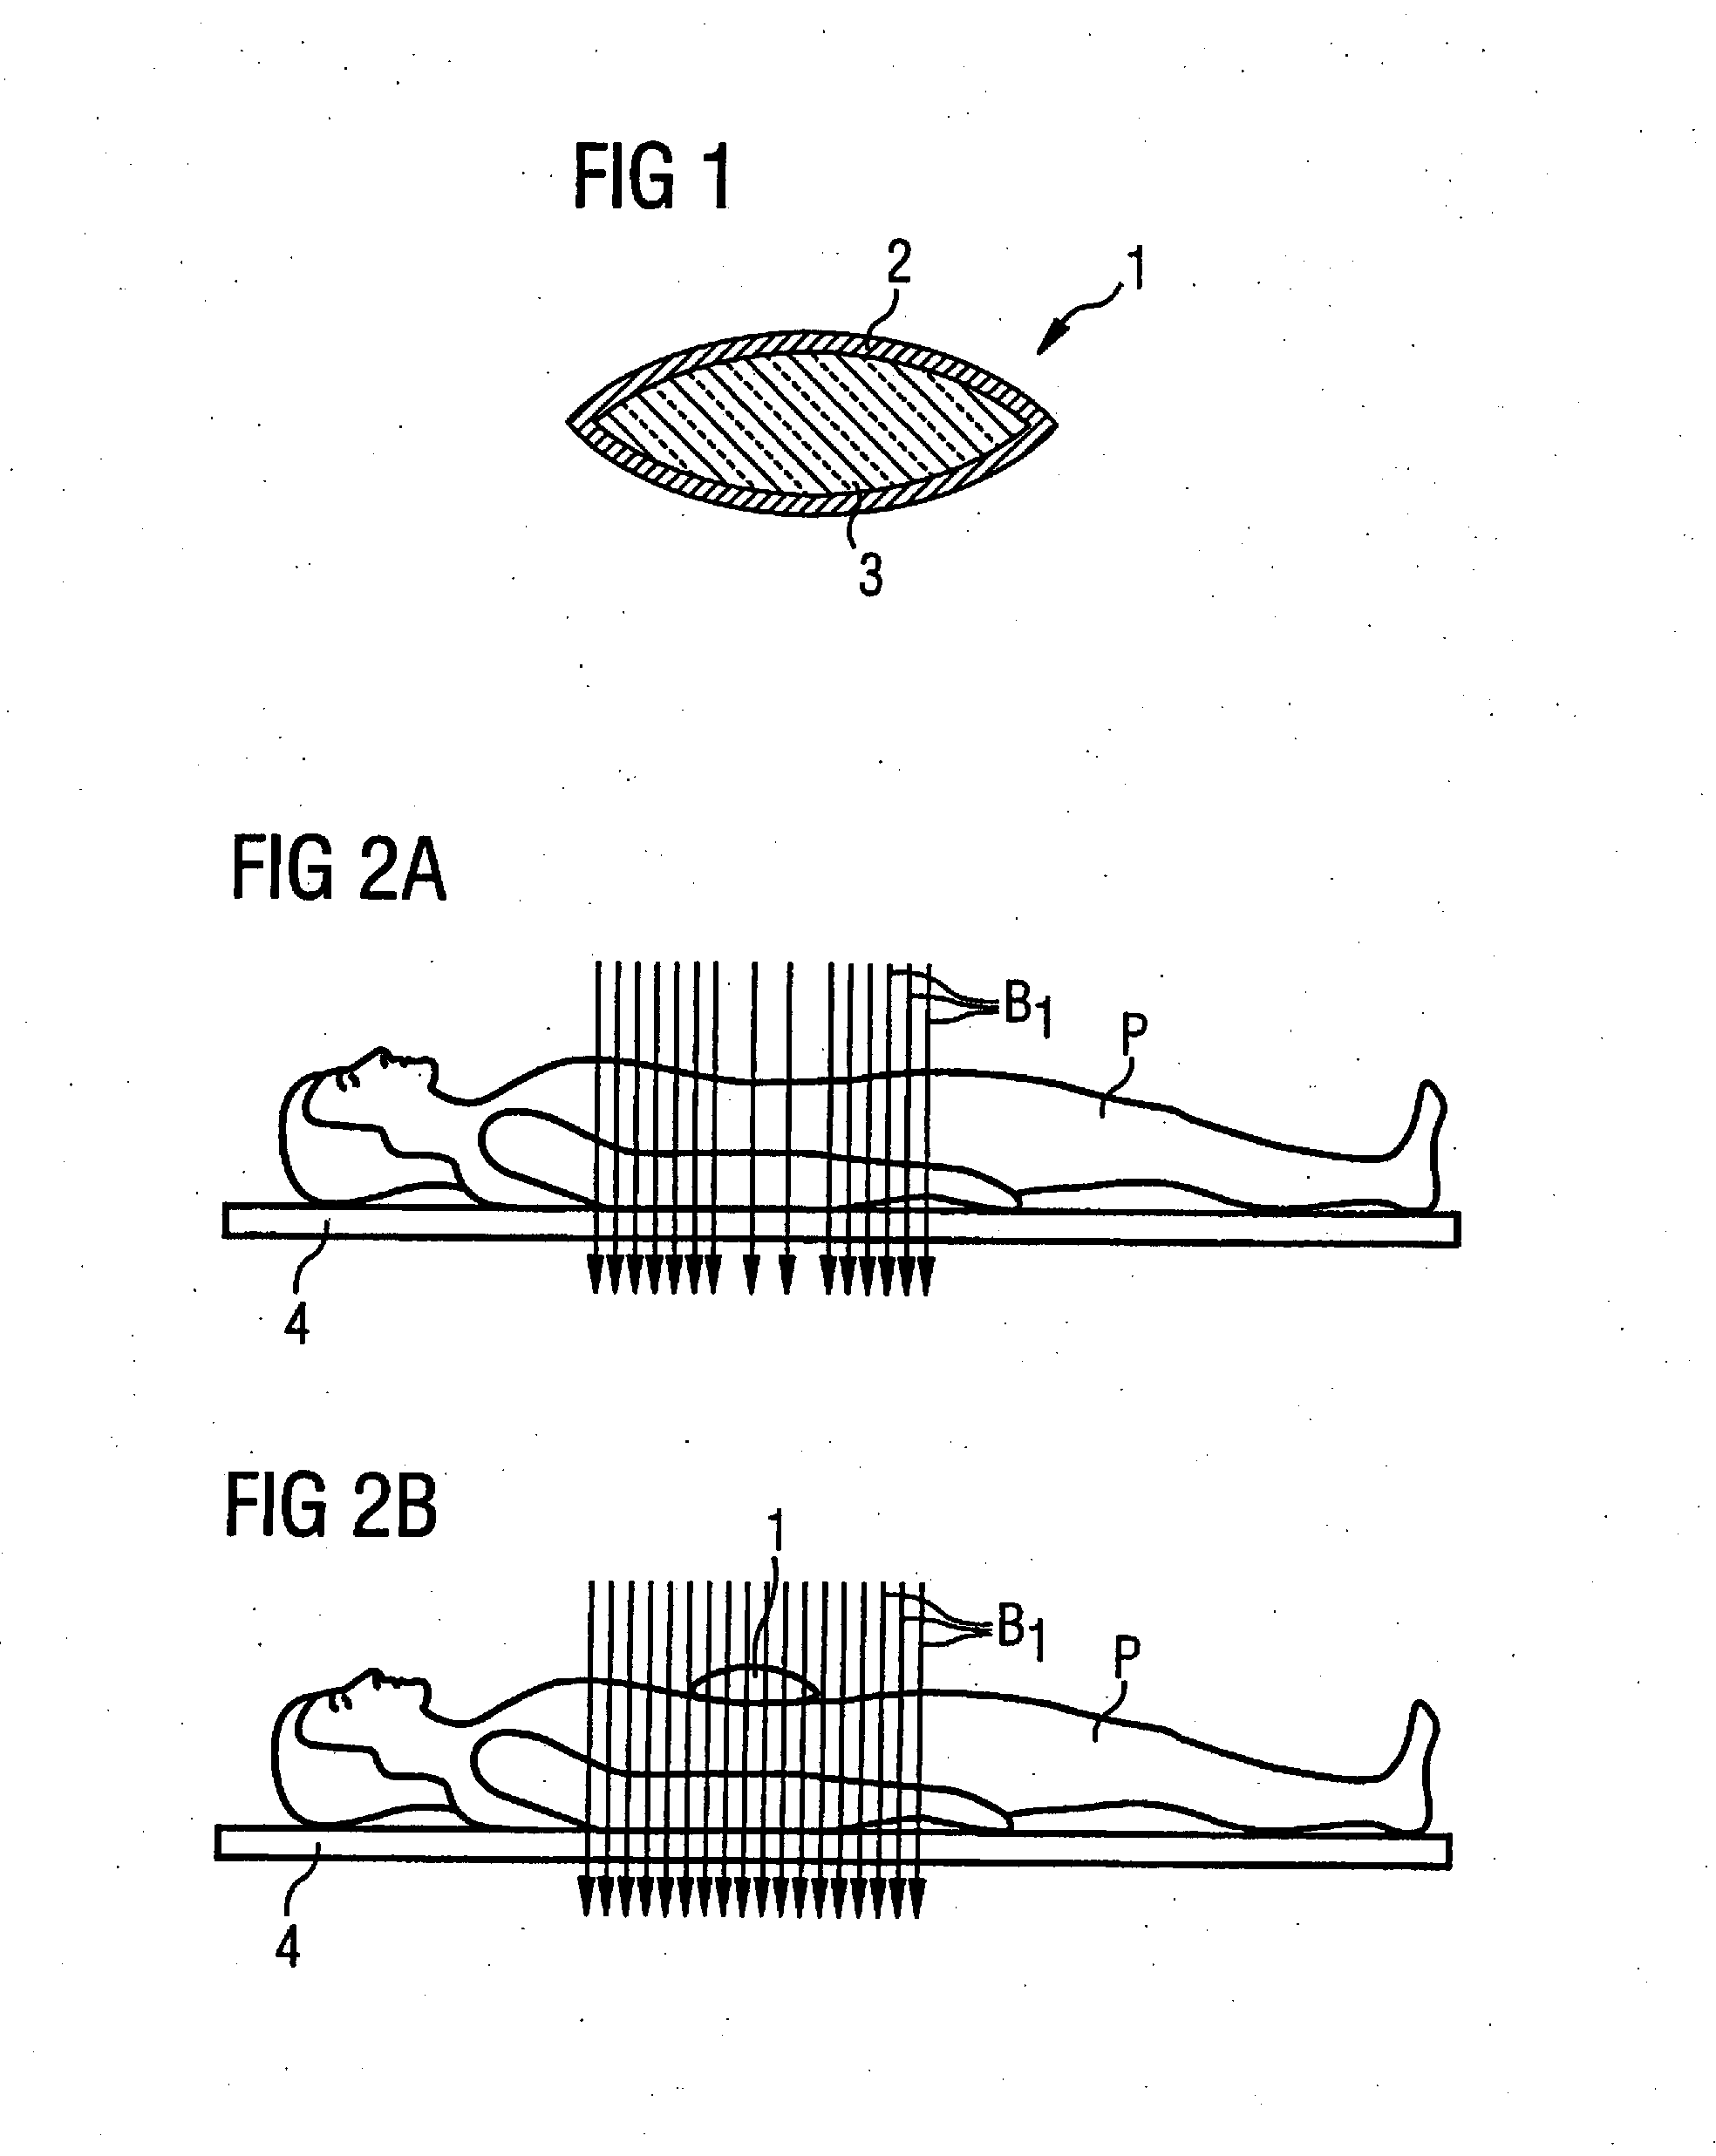 Dielectric element and method for generating a magnetic resonance image therewith